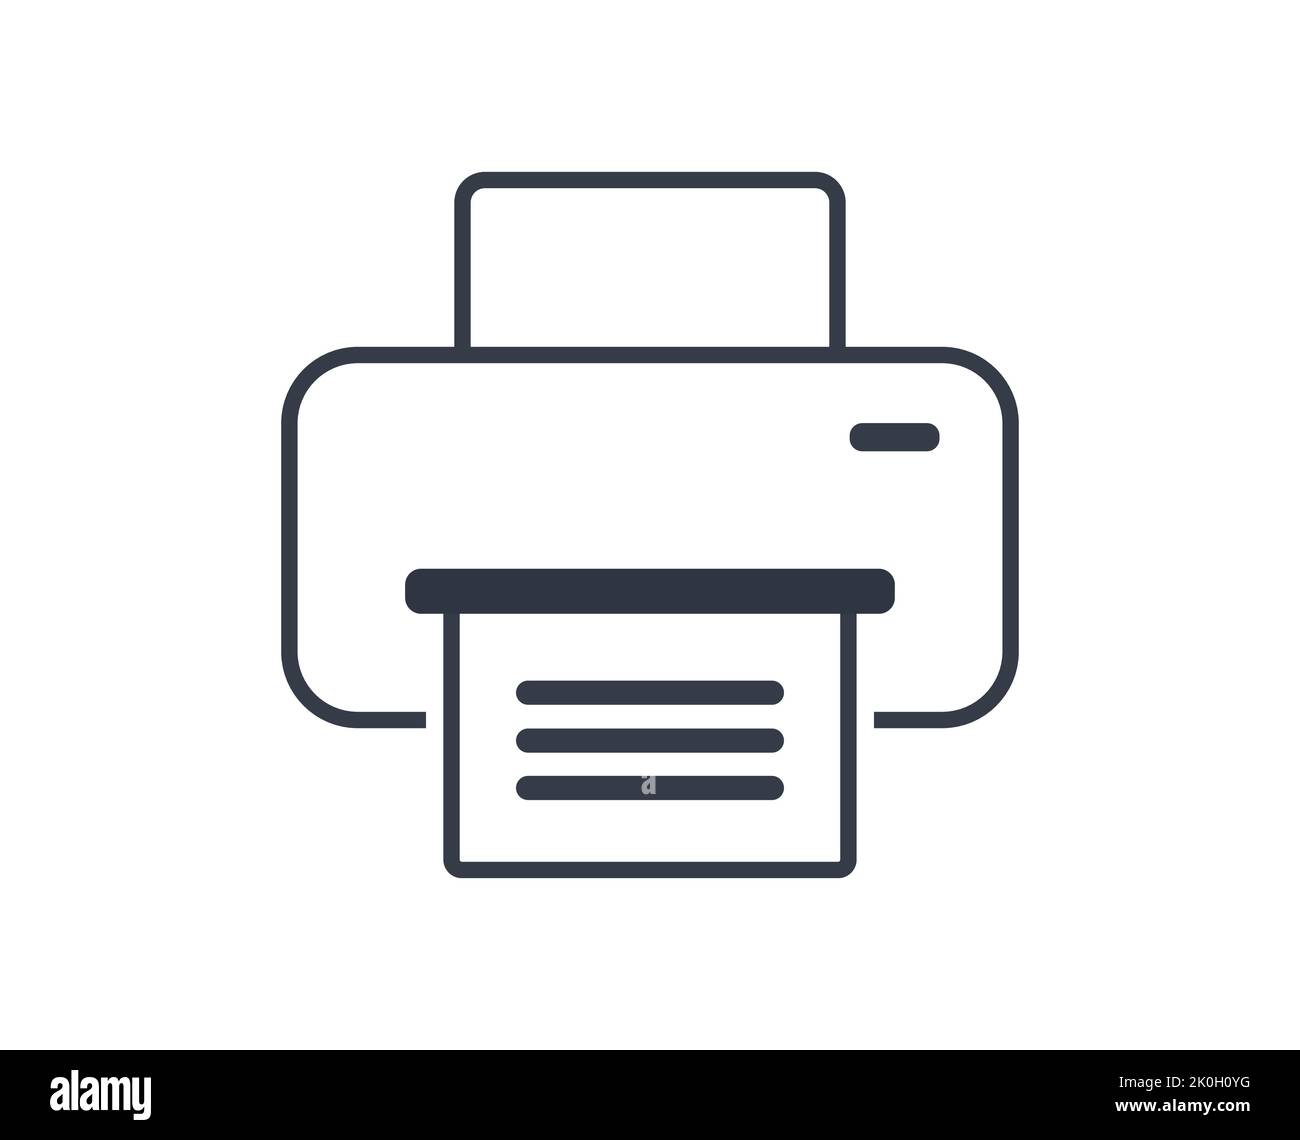 Isolated black and white home printer icon. Vector illustration. Stock Vector